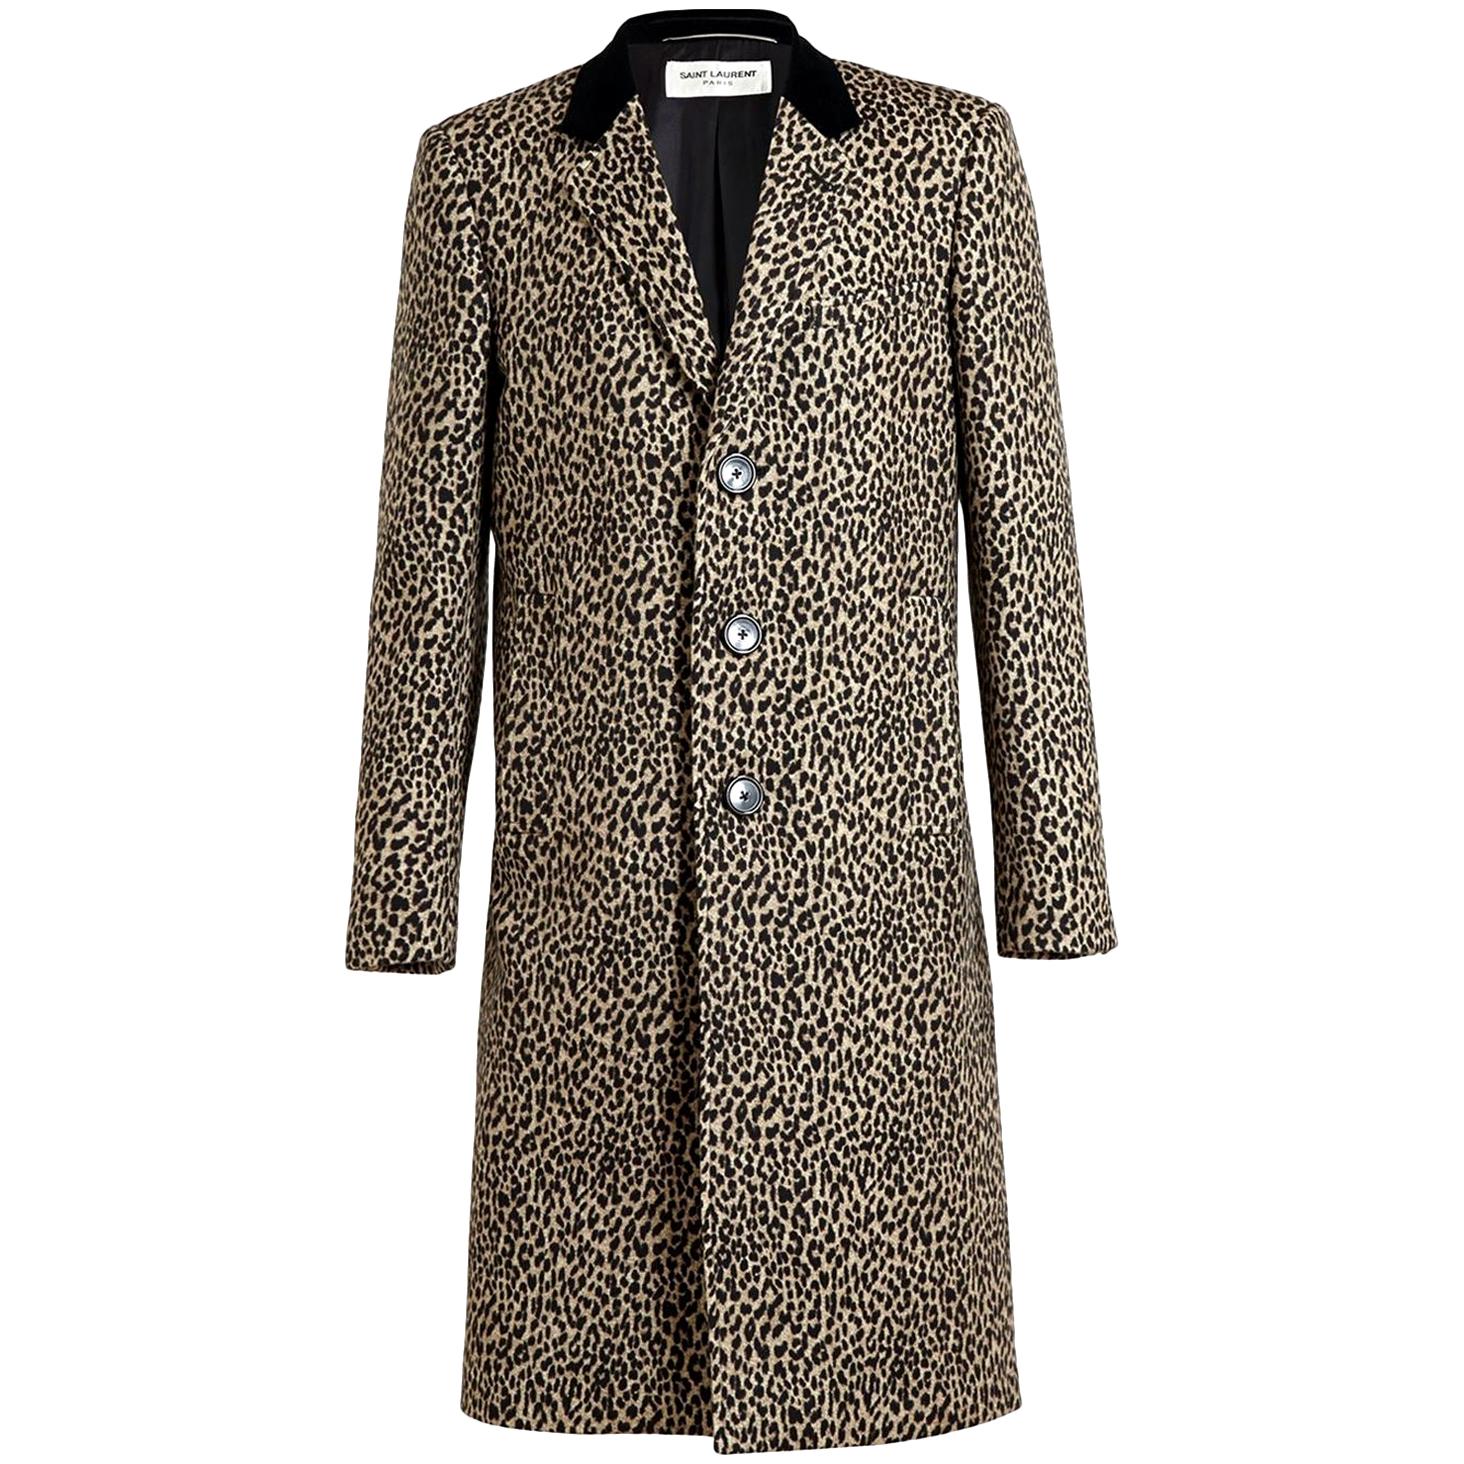 Saint Laurent Leopard Print Wool Single Breasted Coat

- Soft pure wool 
- Leopard print design 
- Single breasted front fastening
- Notched lapel 
- Velvet collar 
- False chest and side welt pockets 
- Buttoned cuffs 
- Back vent
- Longline 
-